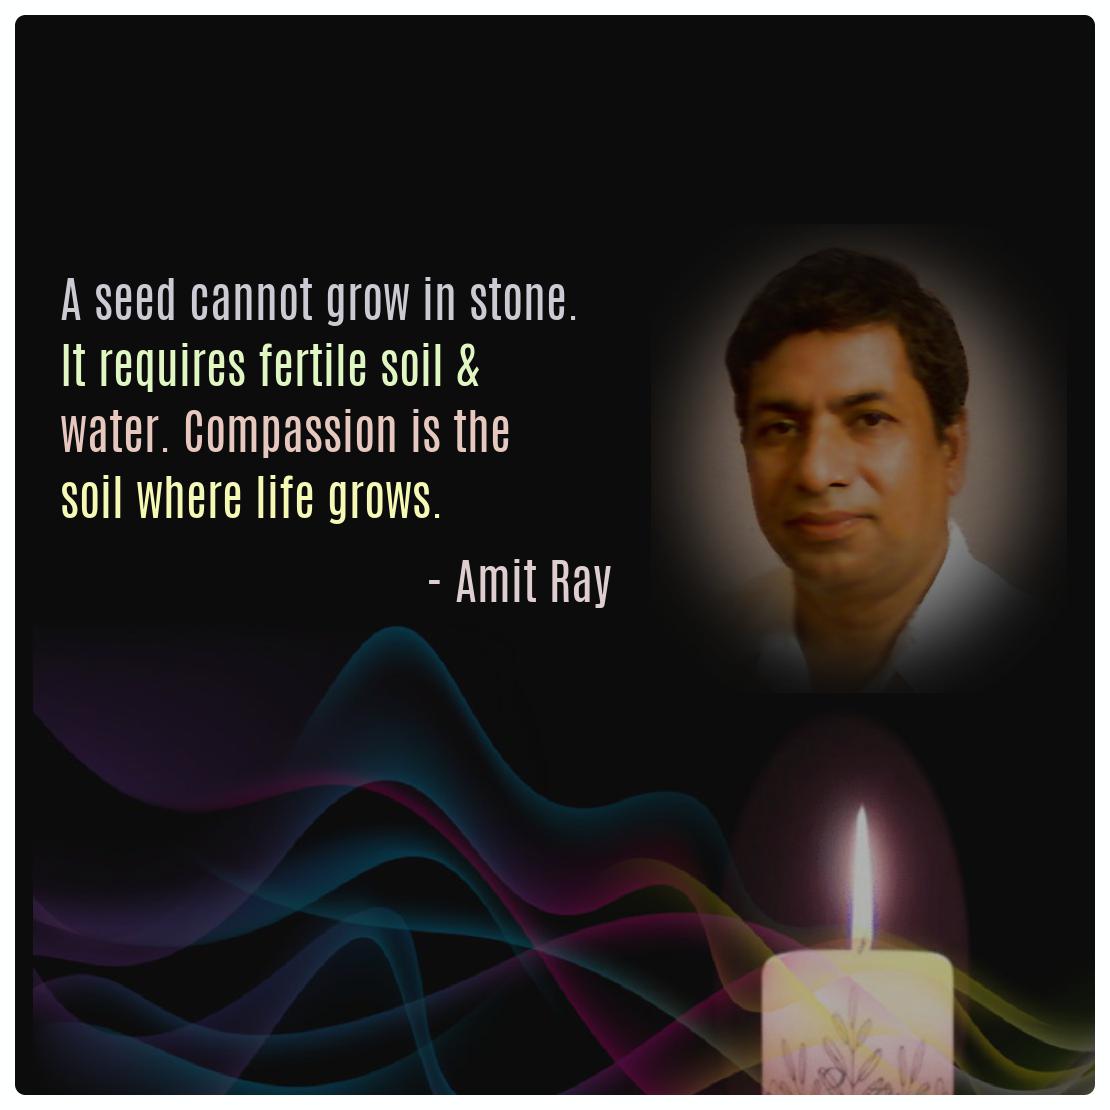 A seed cannot grow in stone. It requires fertile soil & water. Compassion is the soil where life grows. -- Amit Ray